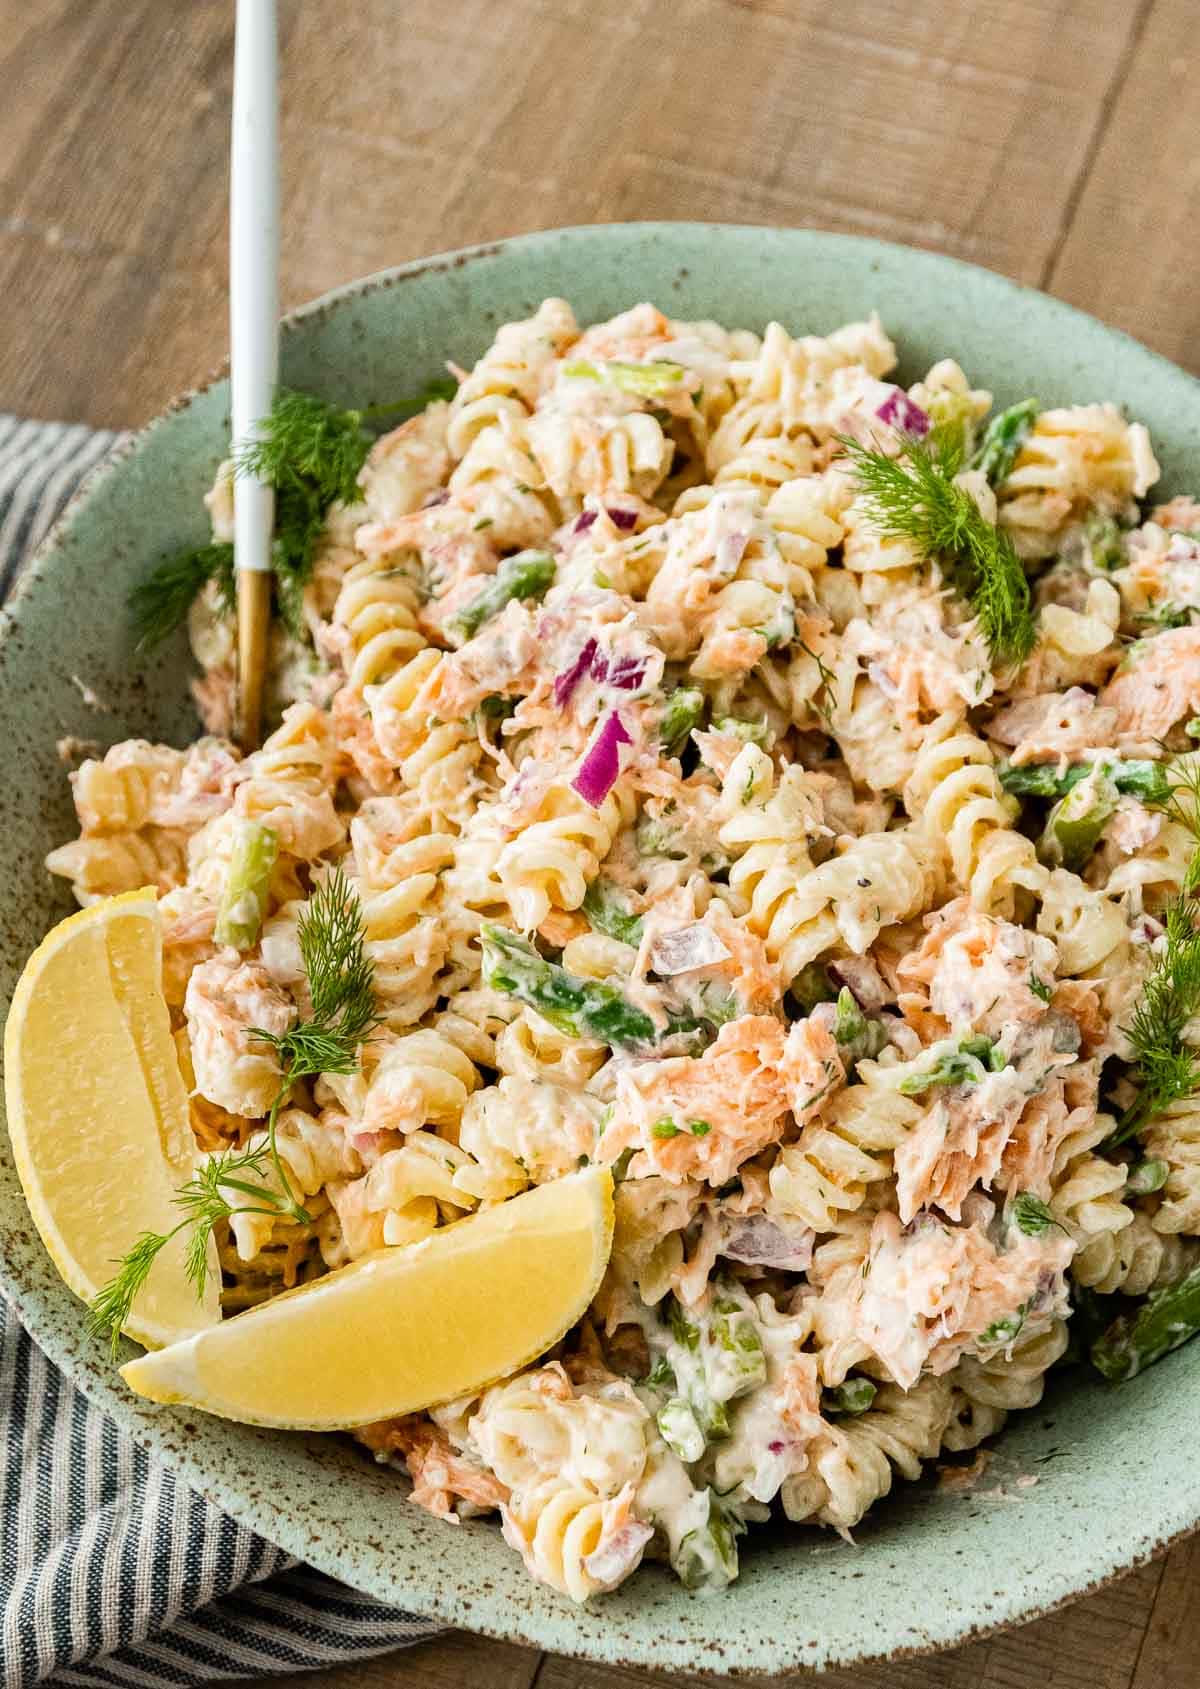 slices of lime in bowl with Dill Salmon Pasta Salad